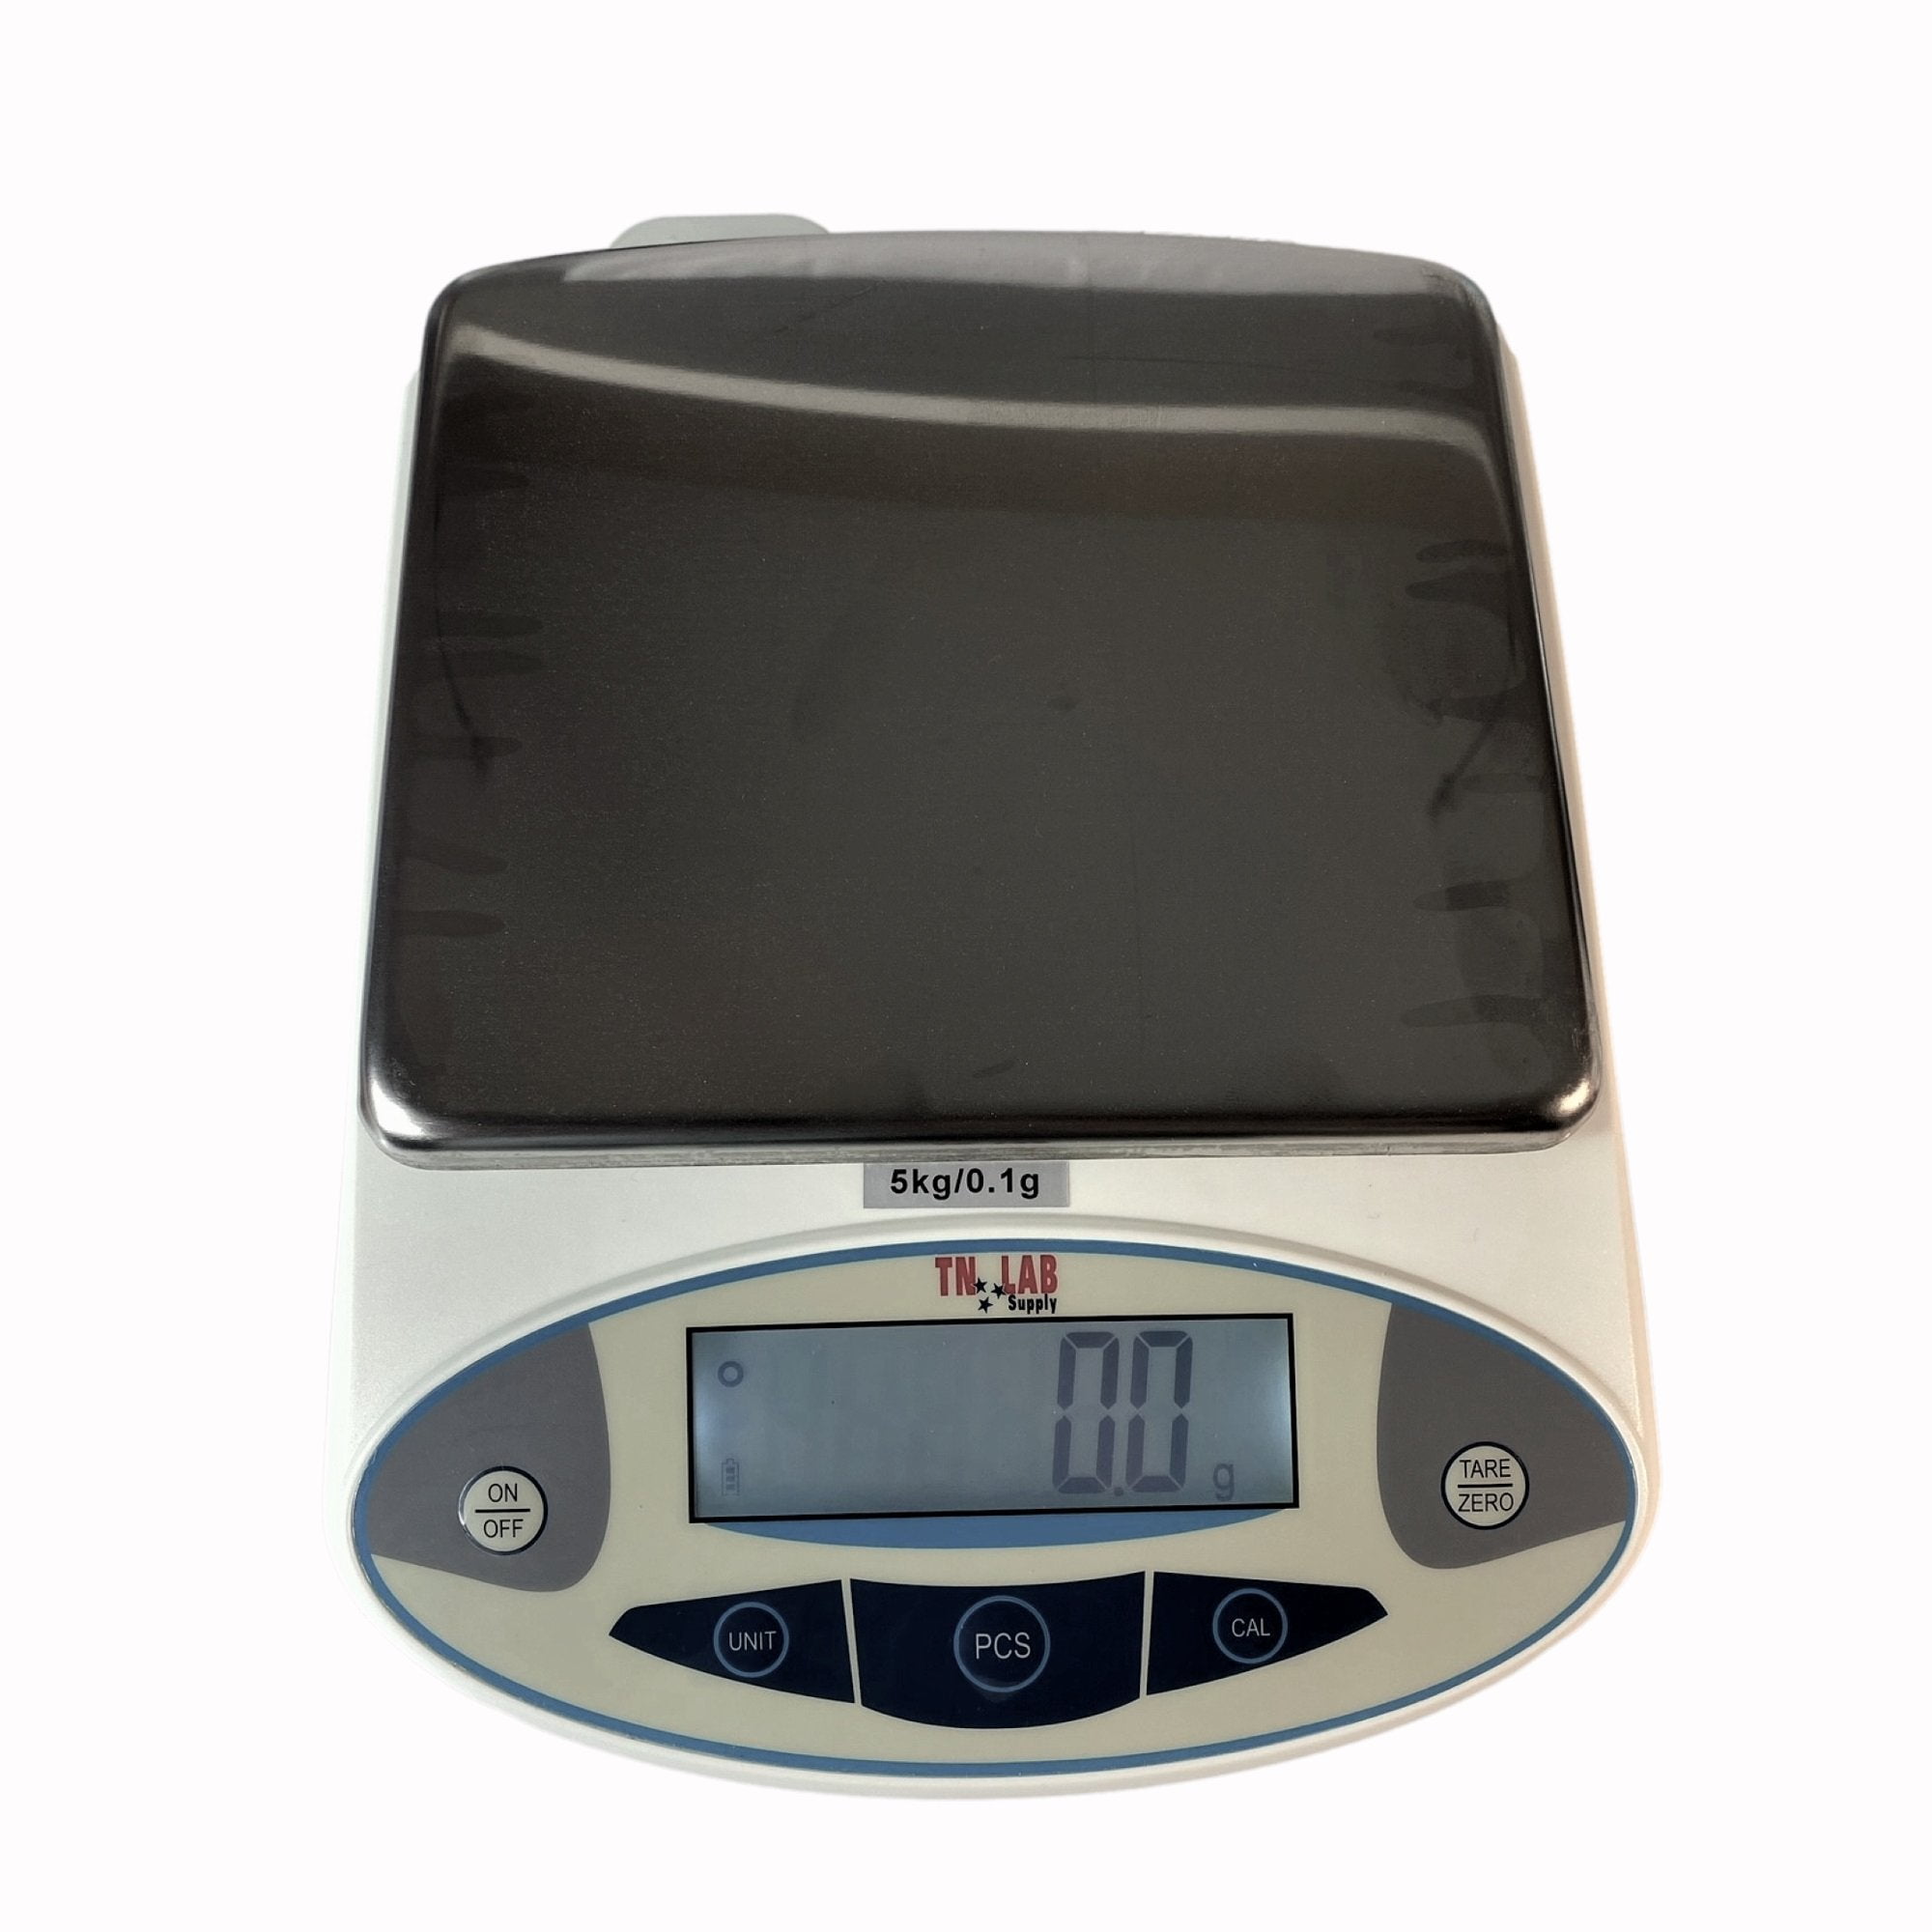 USB Kitchen scal, Digital Kitchen Scales USB Rechargeable,Multi-Function  Accurate-Weight Scales Kitchen,11 lb 5000g/0.1g,High Precision/LCD